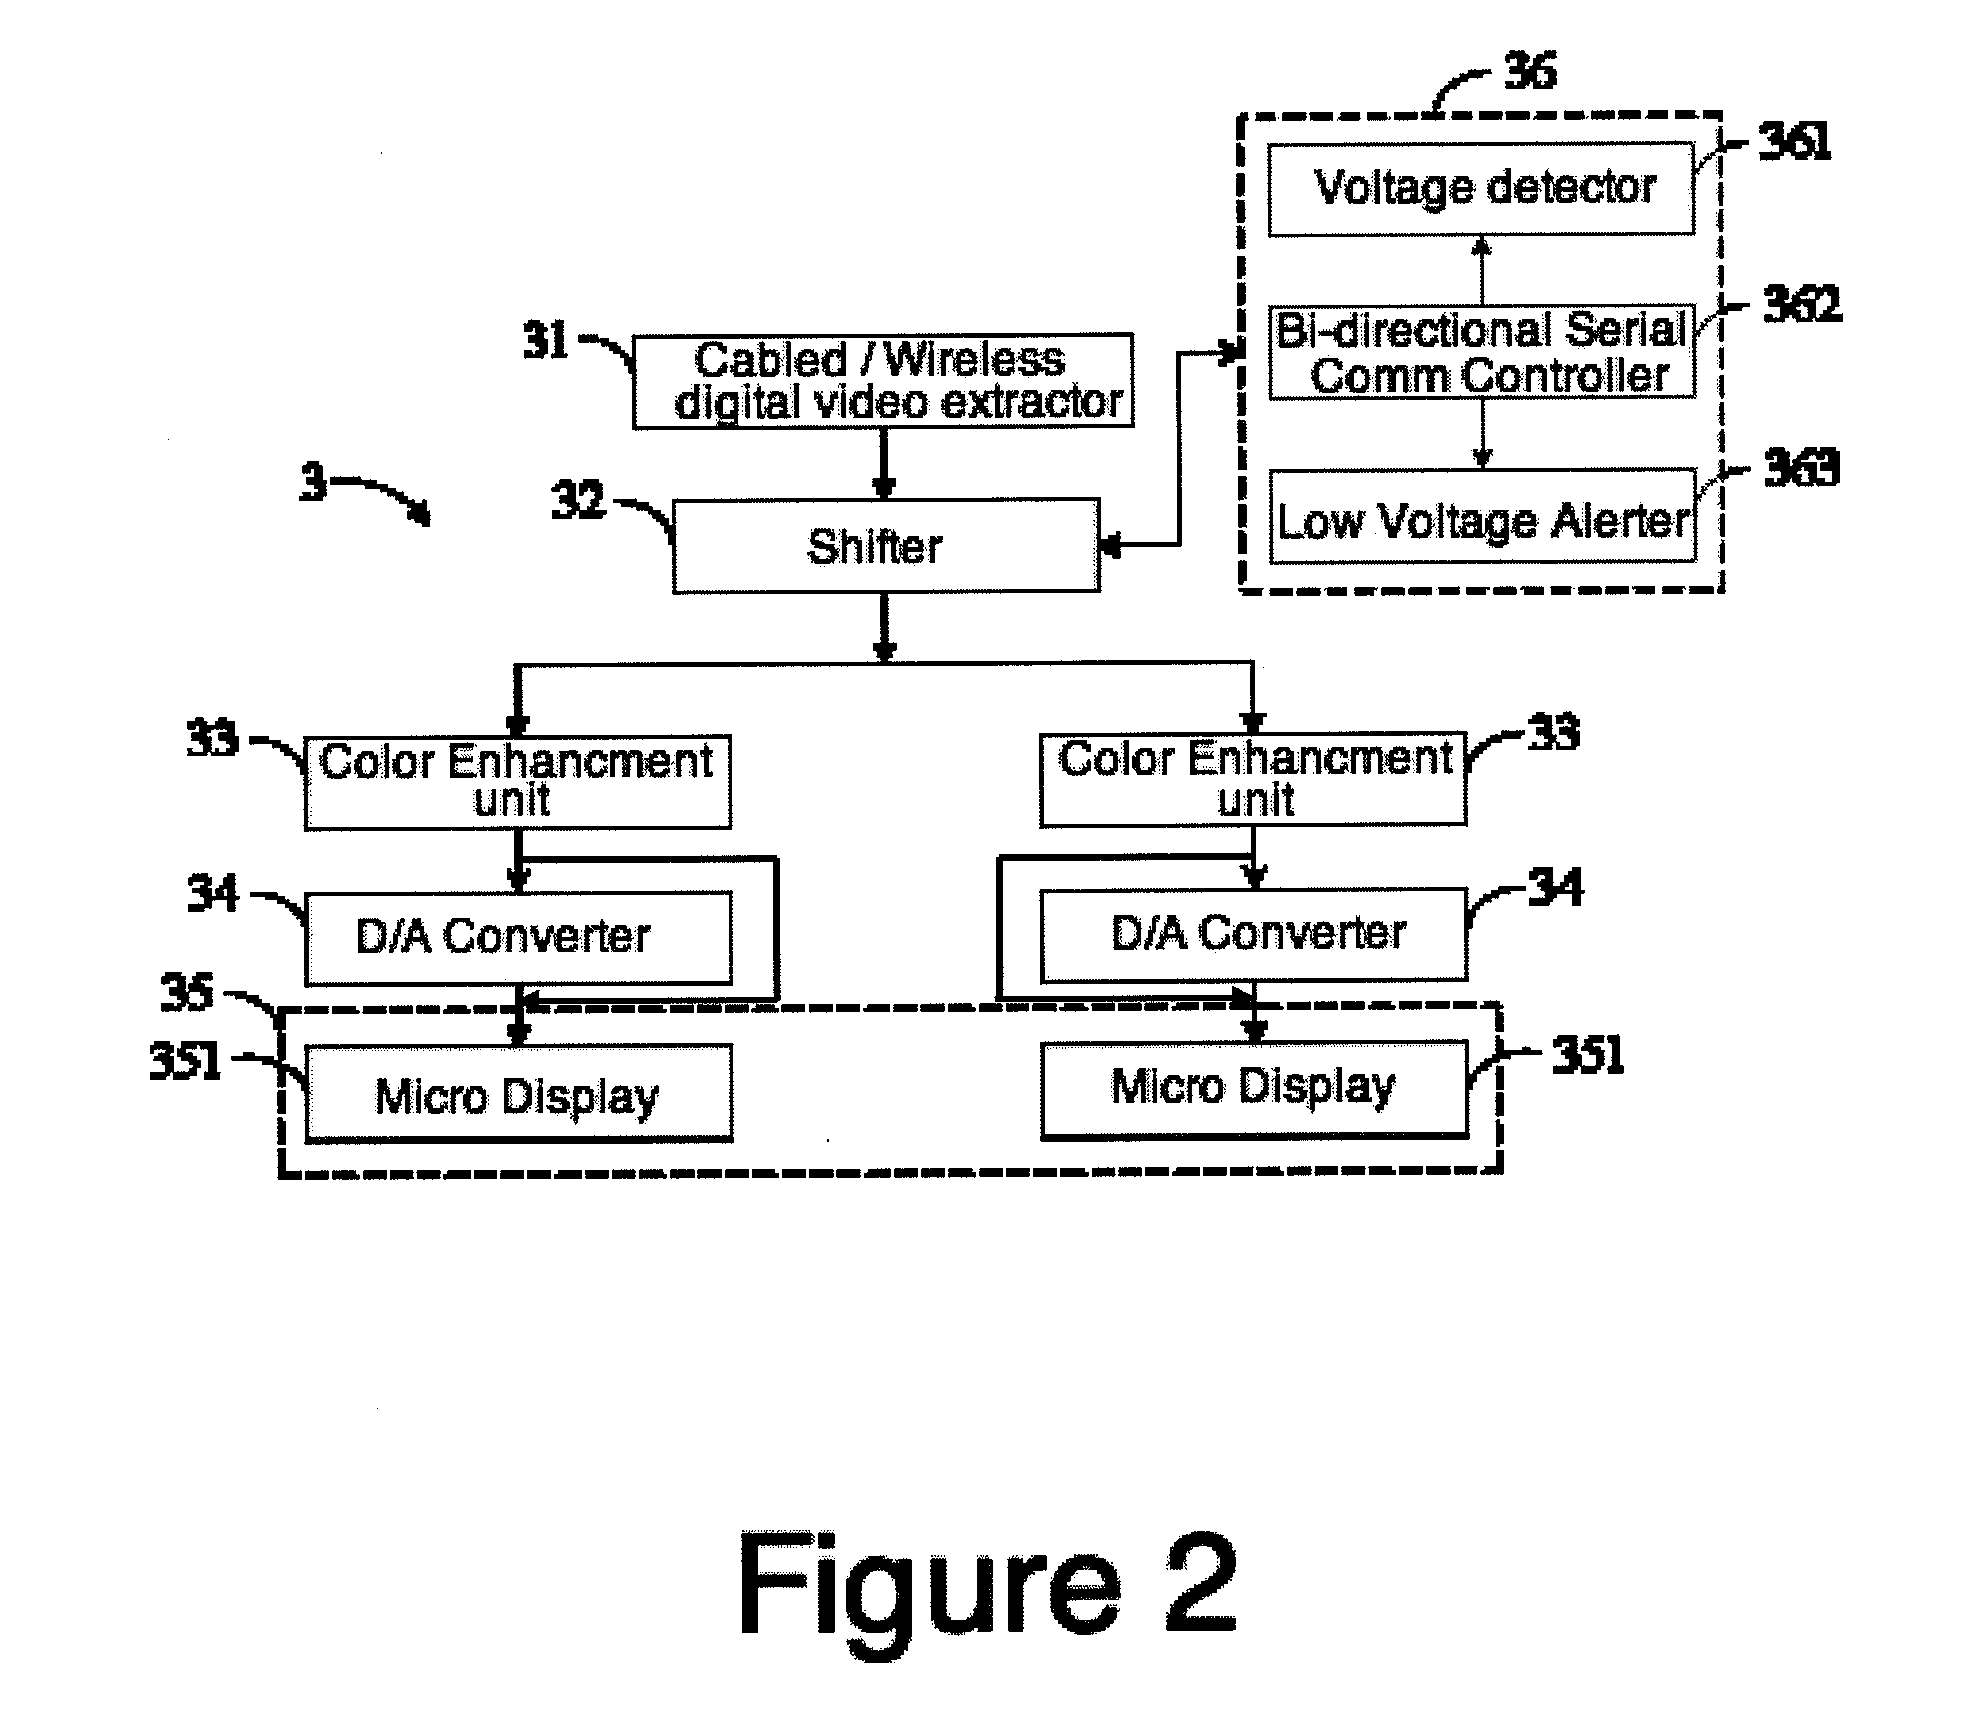 Head-mounted visual display device with stereo vision and its system